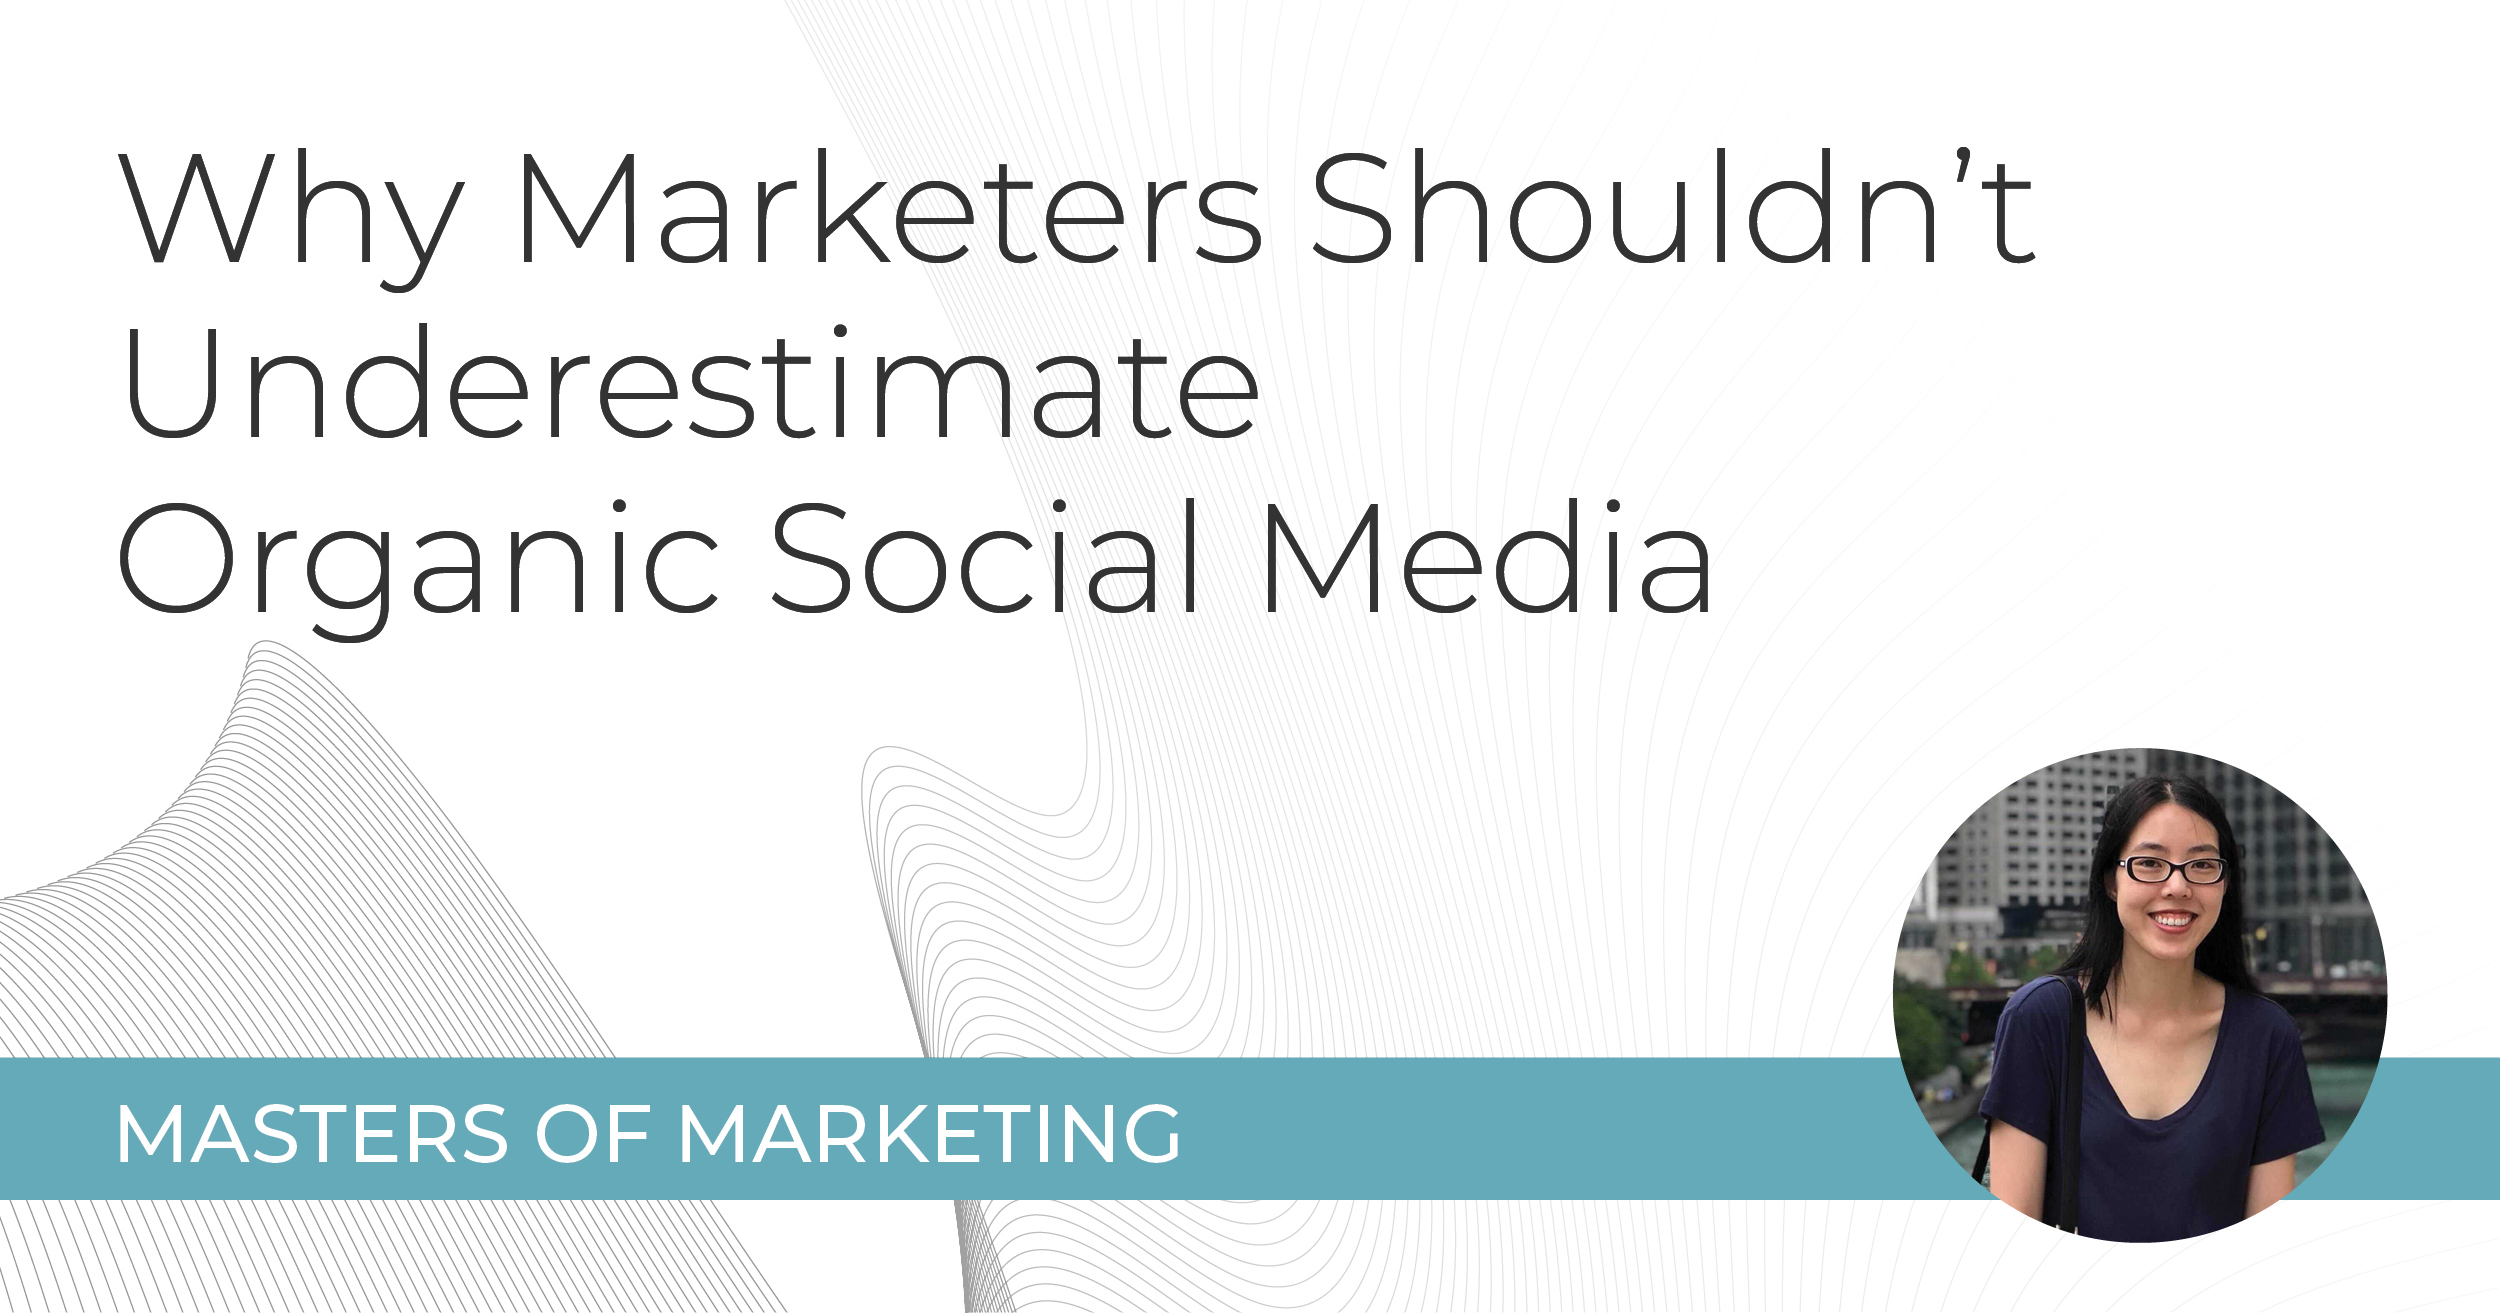 Why marketers shouldn't underestimate organic social media